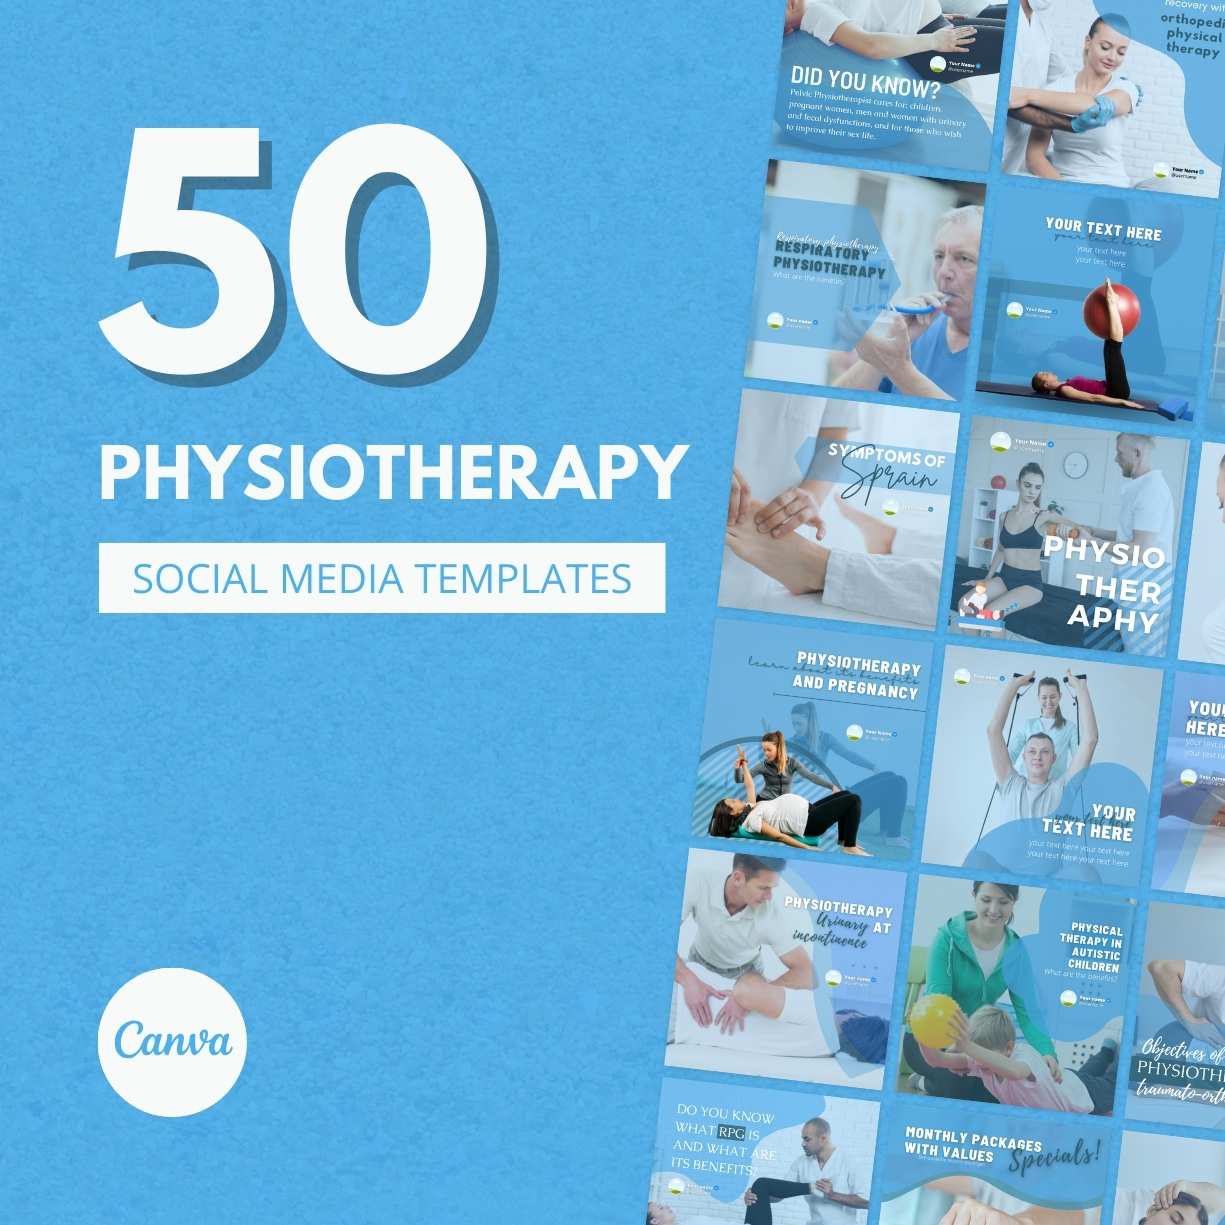 50 Premium Physiotherapy Canva Templates For Social Media cover image.